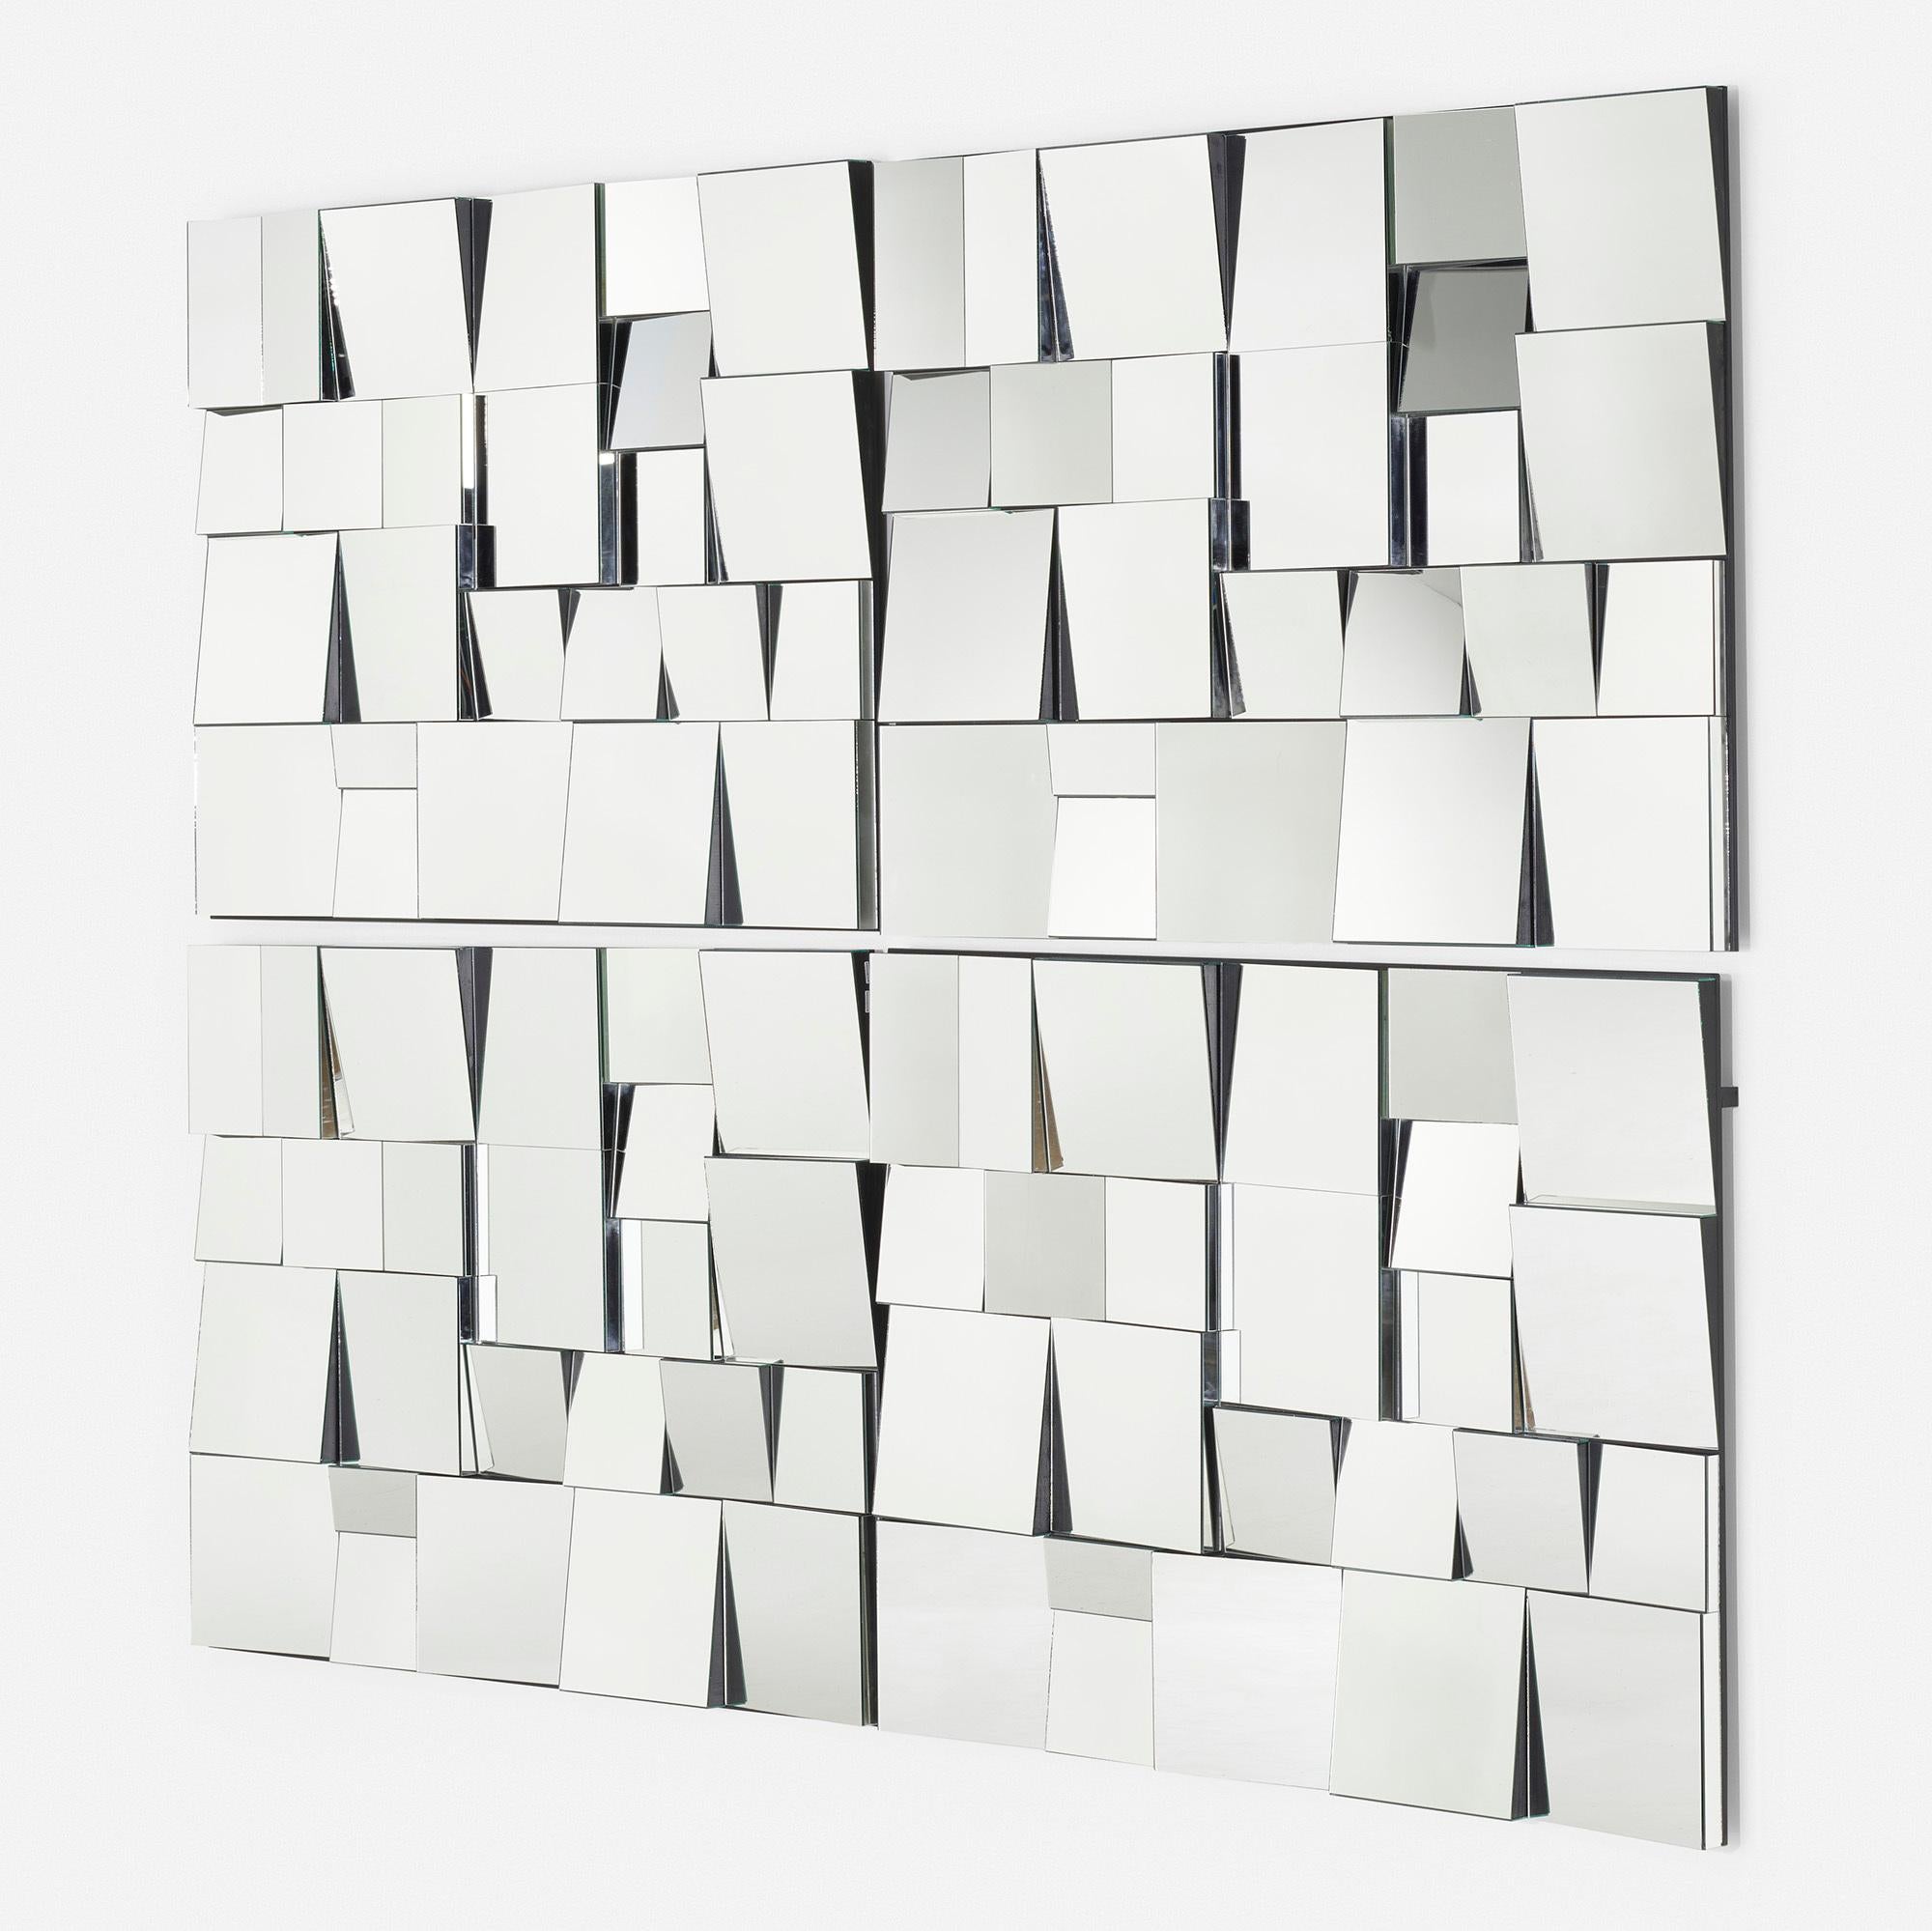 Slopes mirror by Neal small, circa 1975.

Panels are sold individually and priced per piece. A total of four panels are available.
Made in USA, circa 1975.

Additional information:
Material: Mirrored glass over lacquered wood frame.
Size: